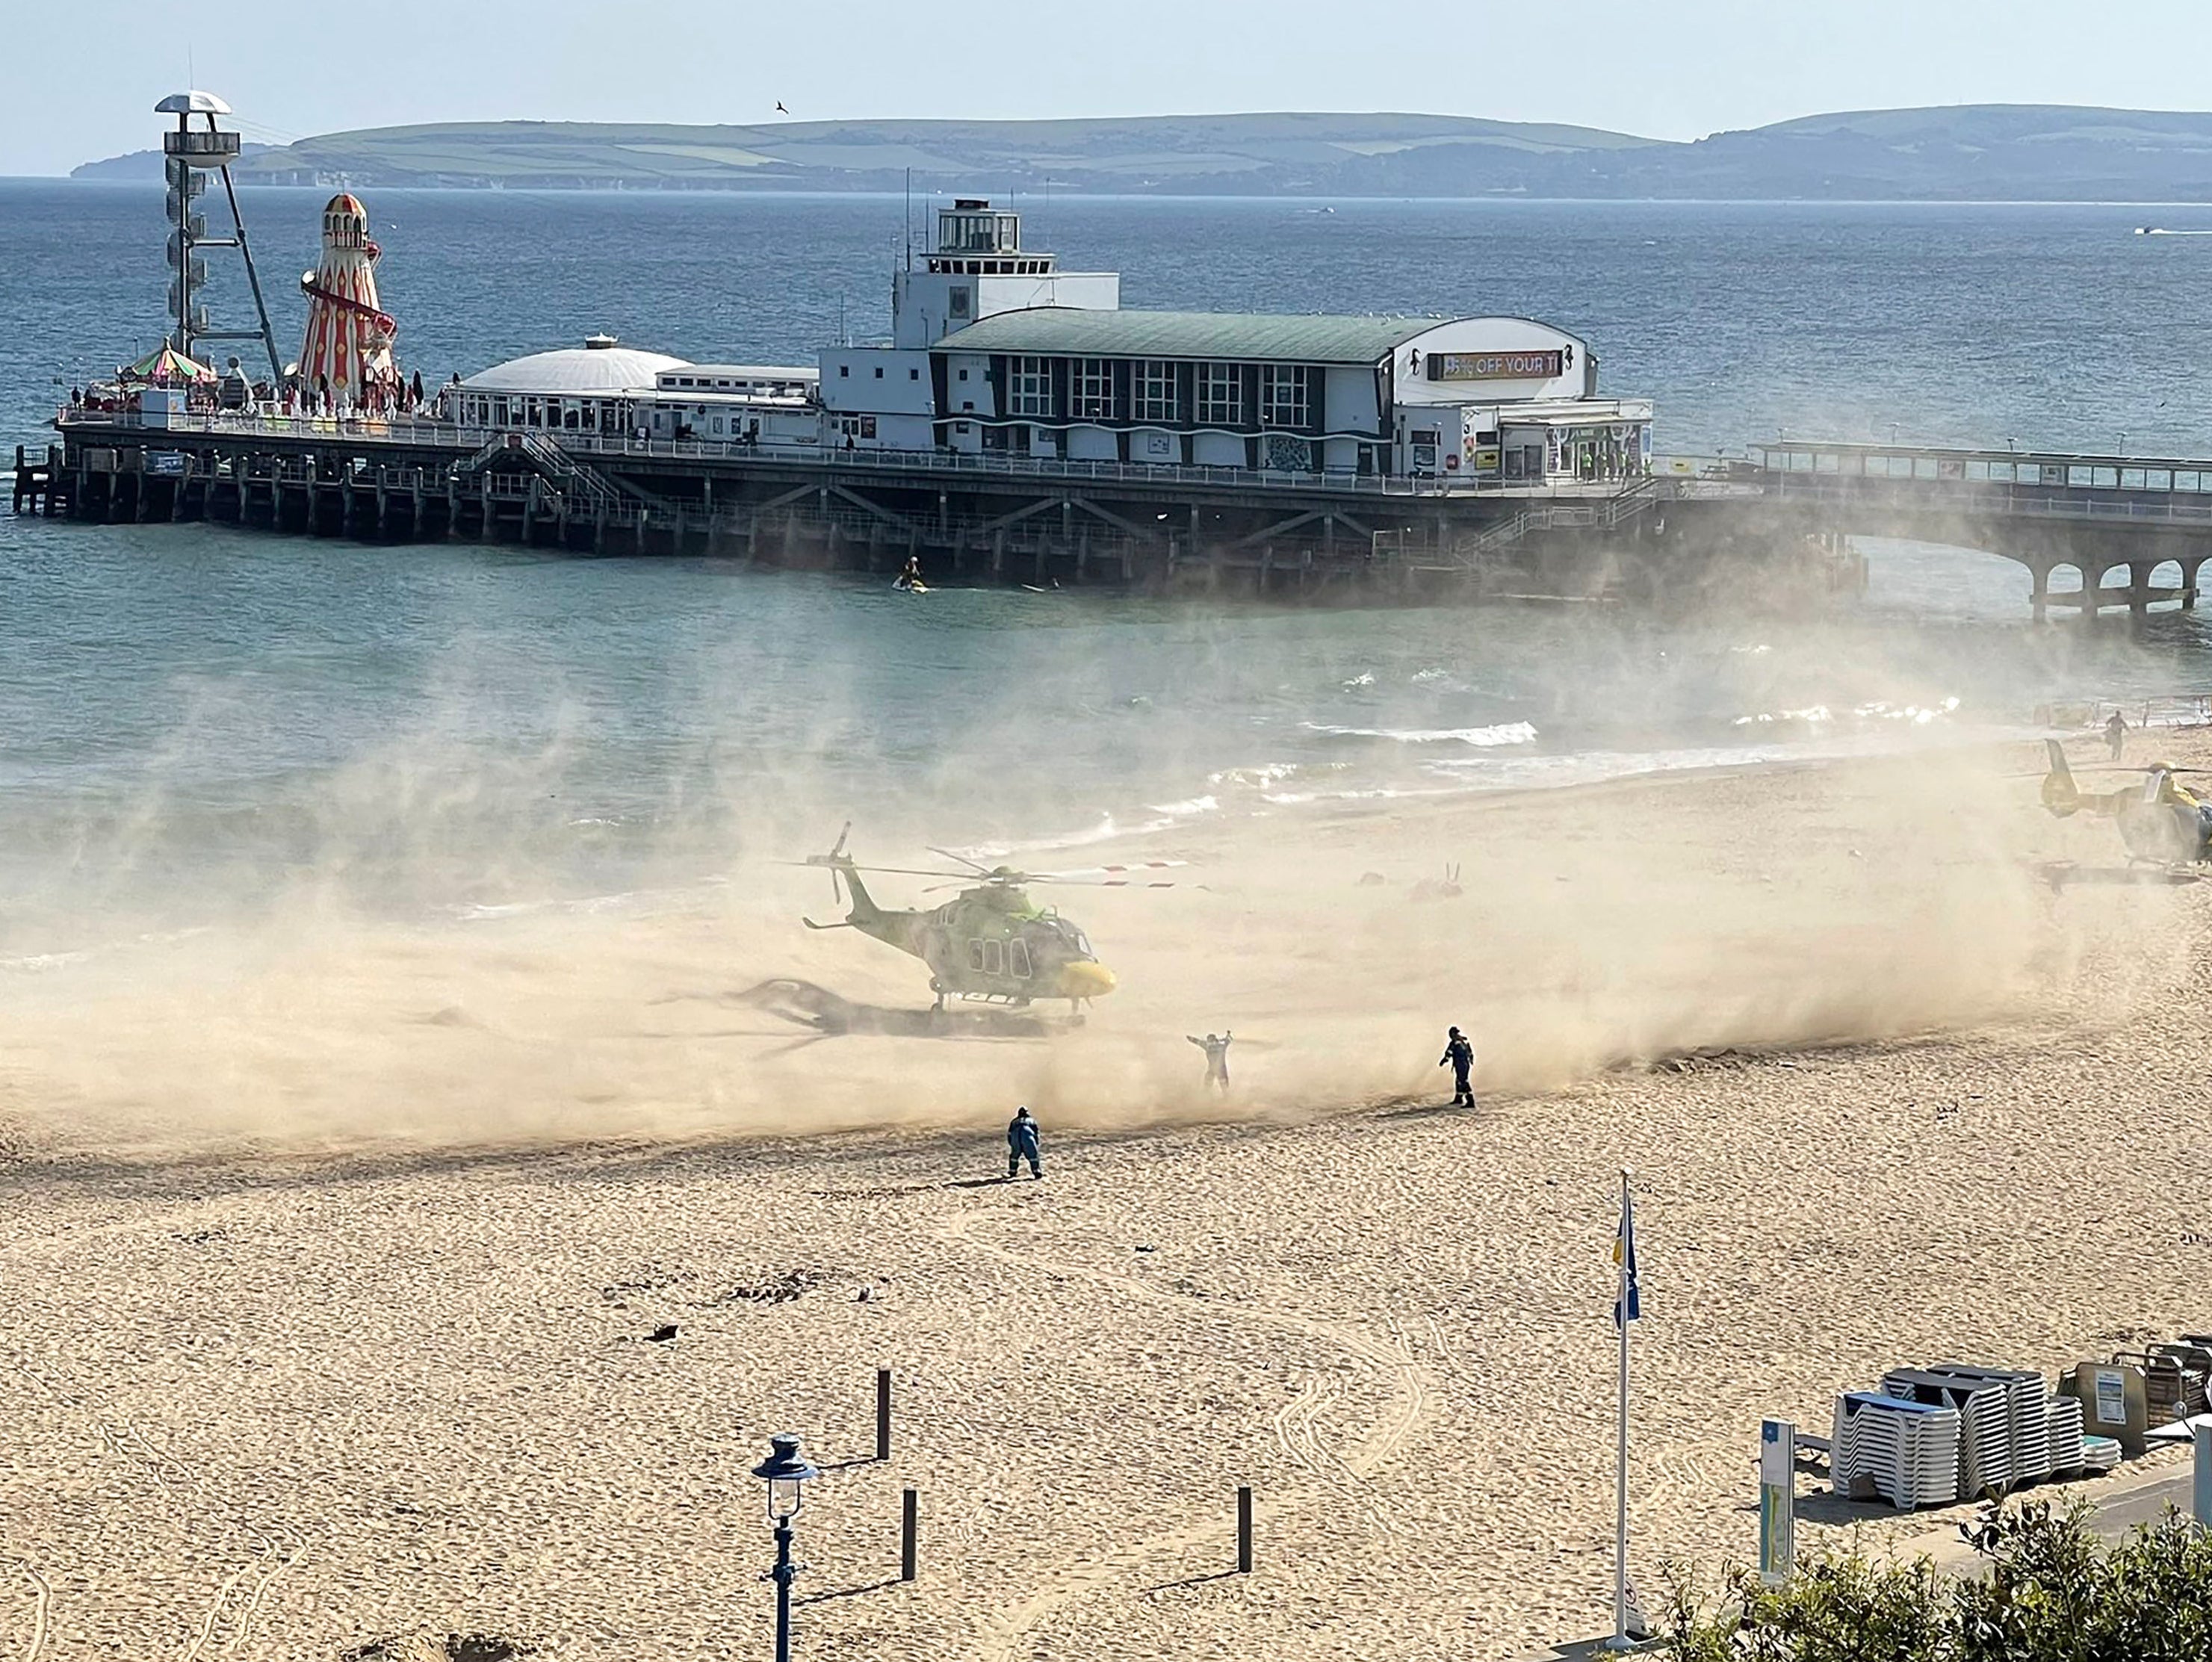 Air ambulances landed on the beach during the incident